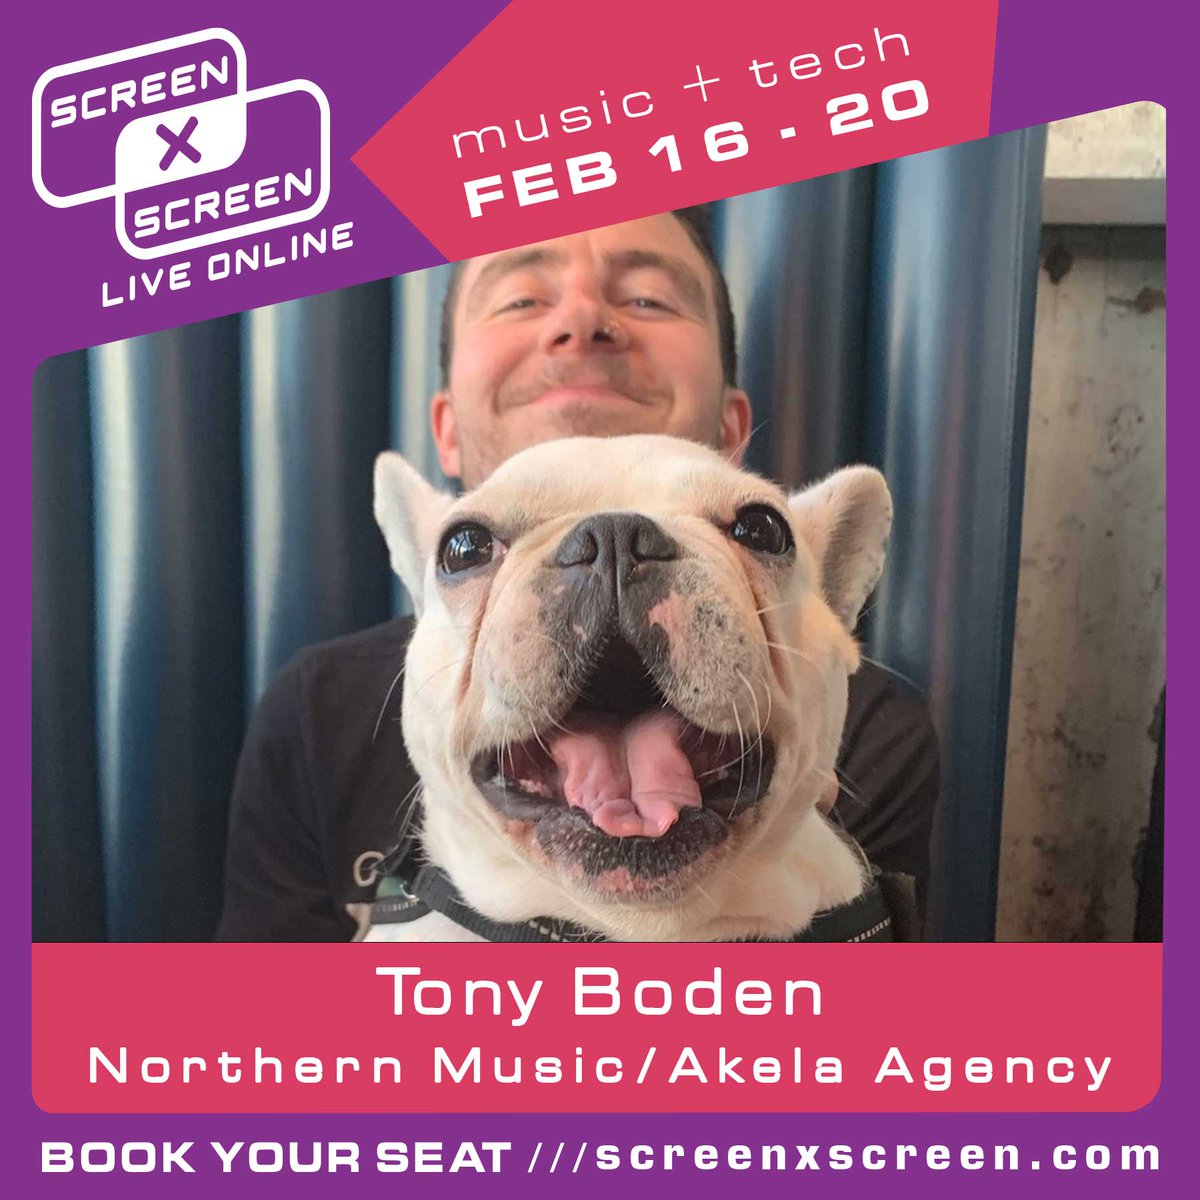 Looking forward to having Tony Boden from Northern Music/Akela Agency join us for SCREEN x SCREEN!

TUES FEB 16 - SAT FEB 20
Online conference
LINK IN BIO!!

@darryl_hurs #streaming #SXS21 #screenxscreen #online #musicindustry #musicmonetization #music #artists #AI #producers #VR